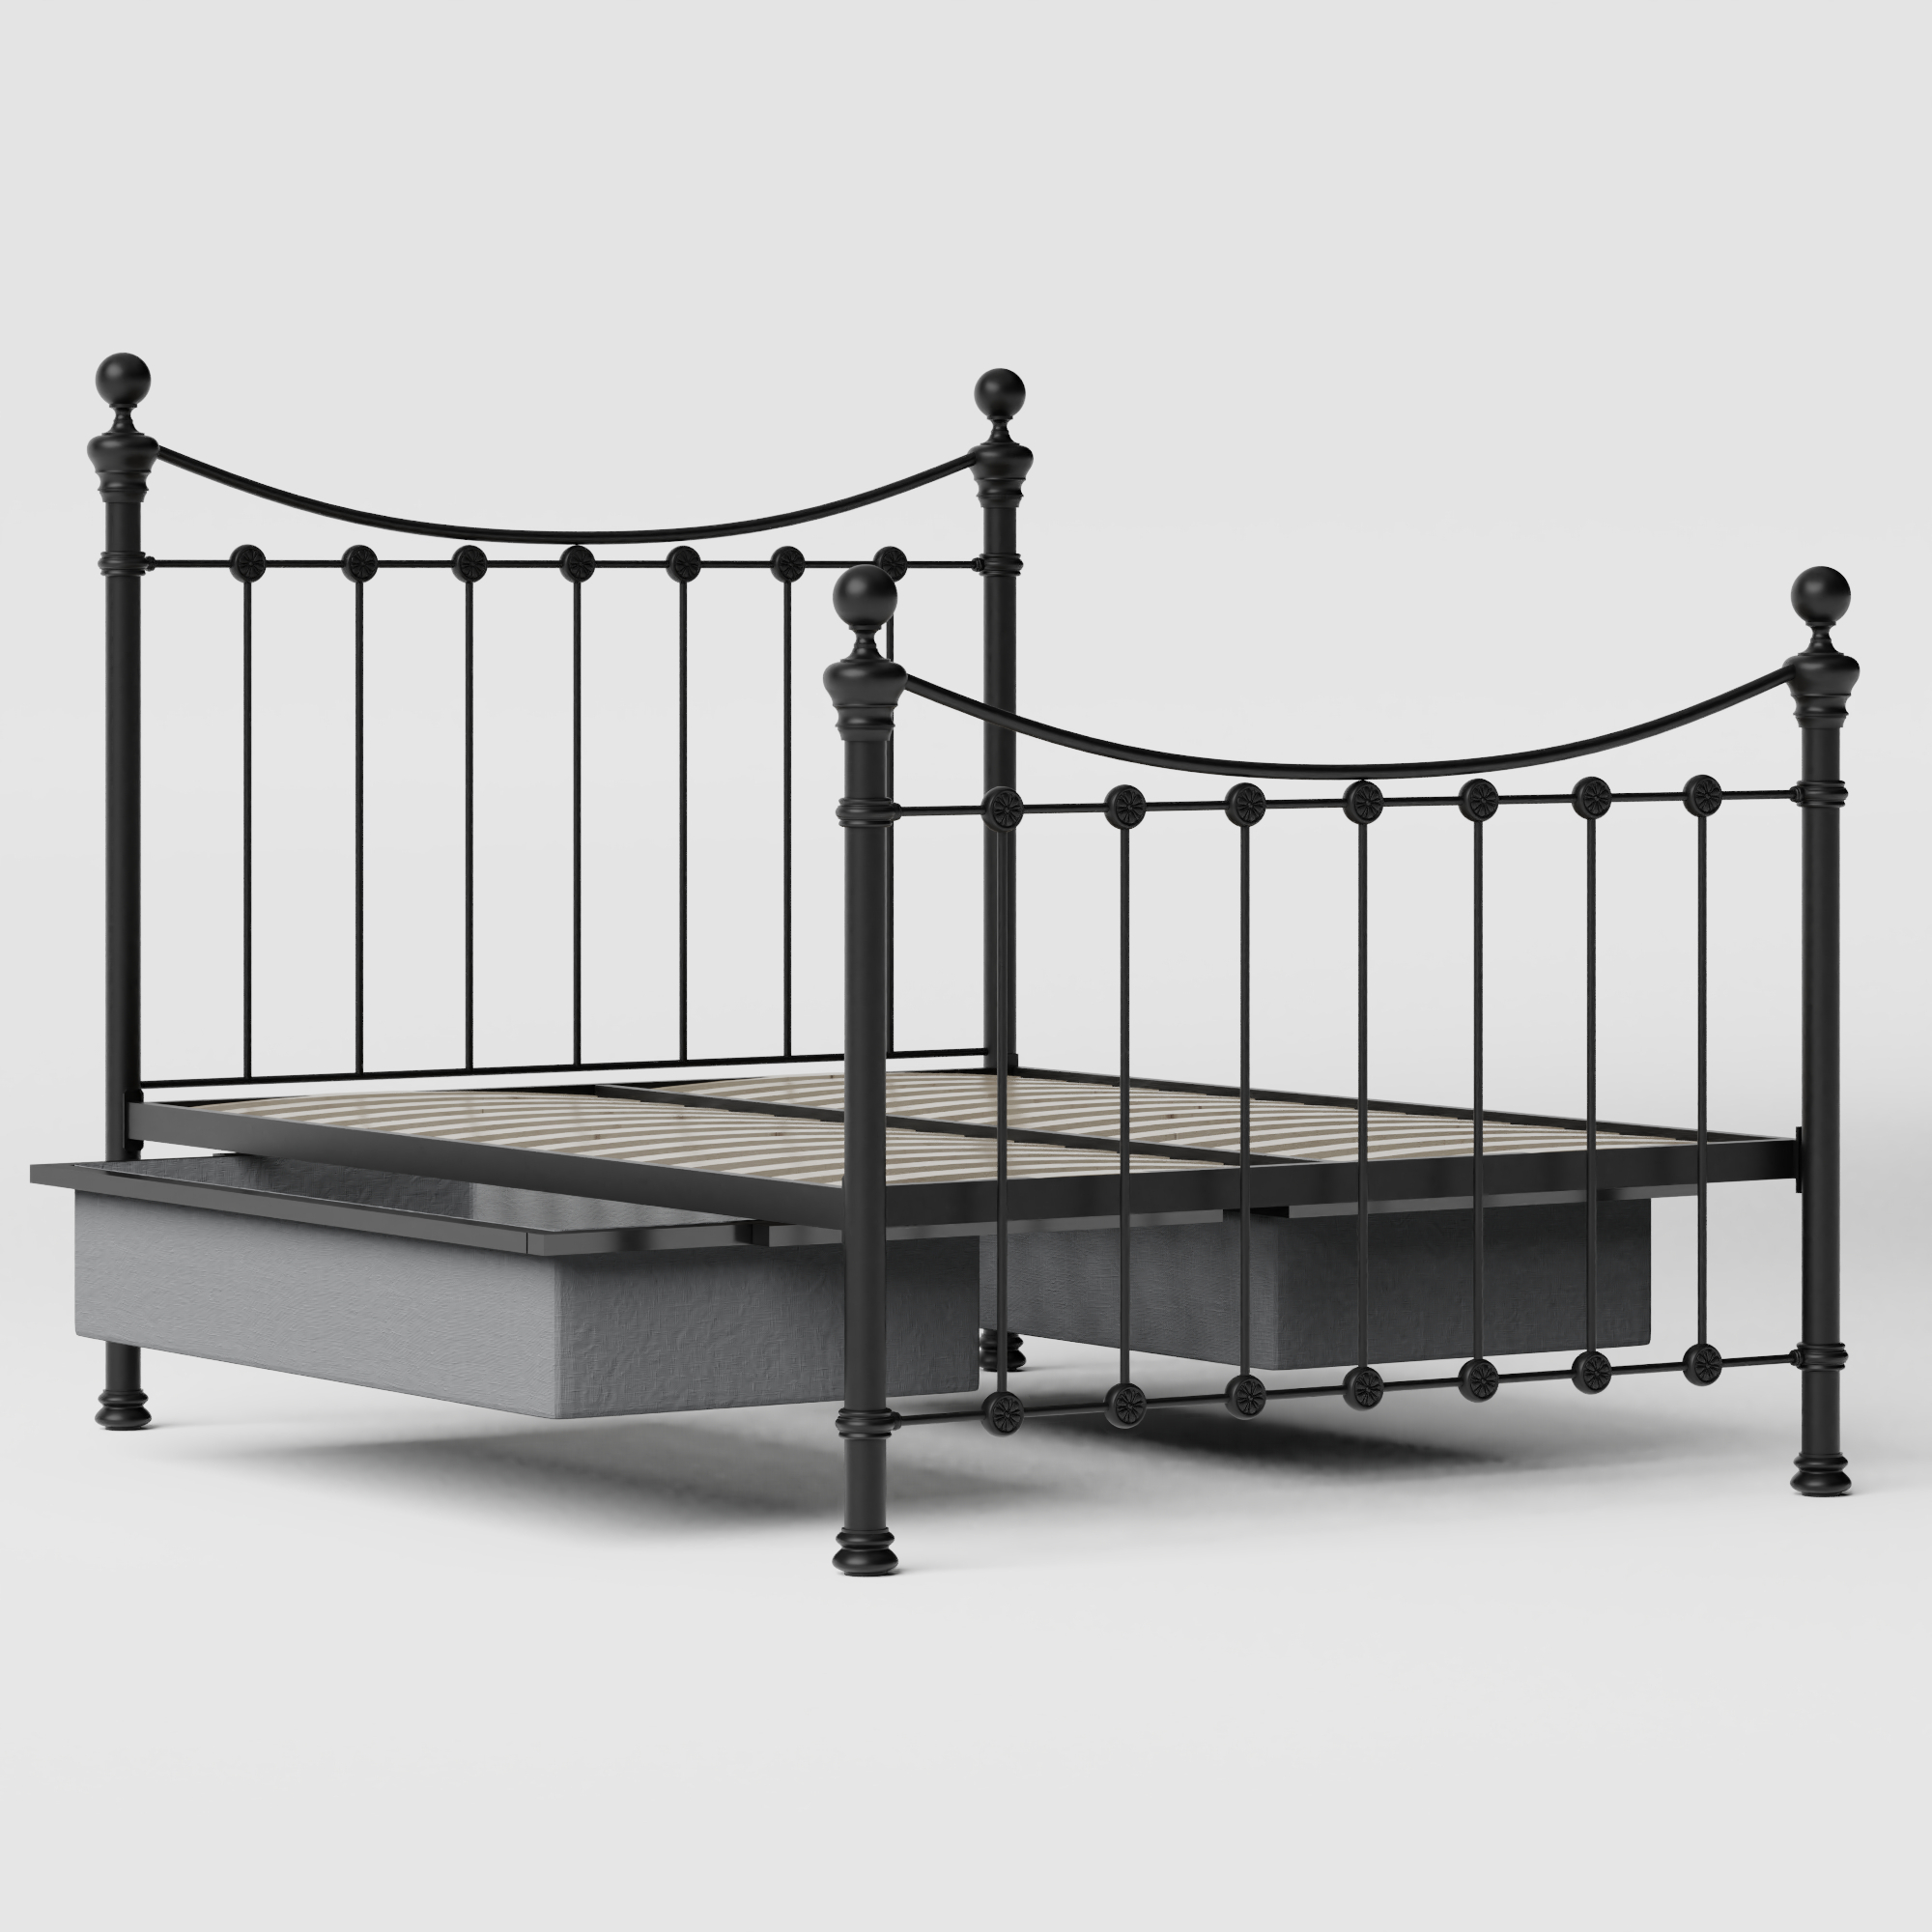 Selkirk Solo iron/metal bed in black with drawers